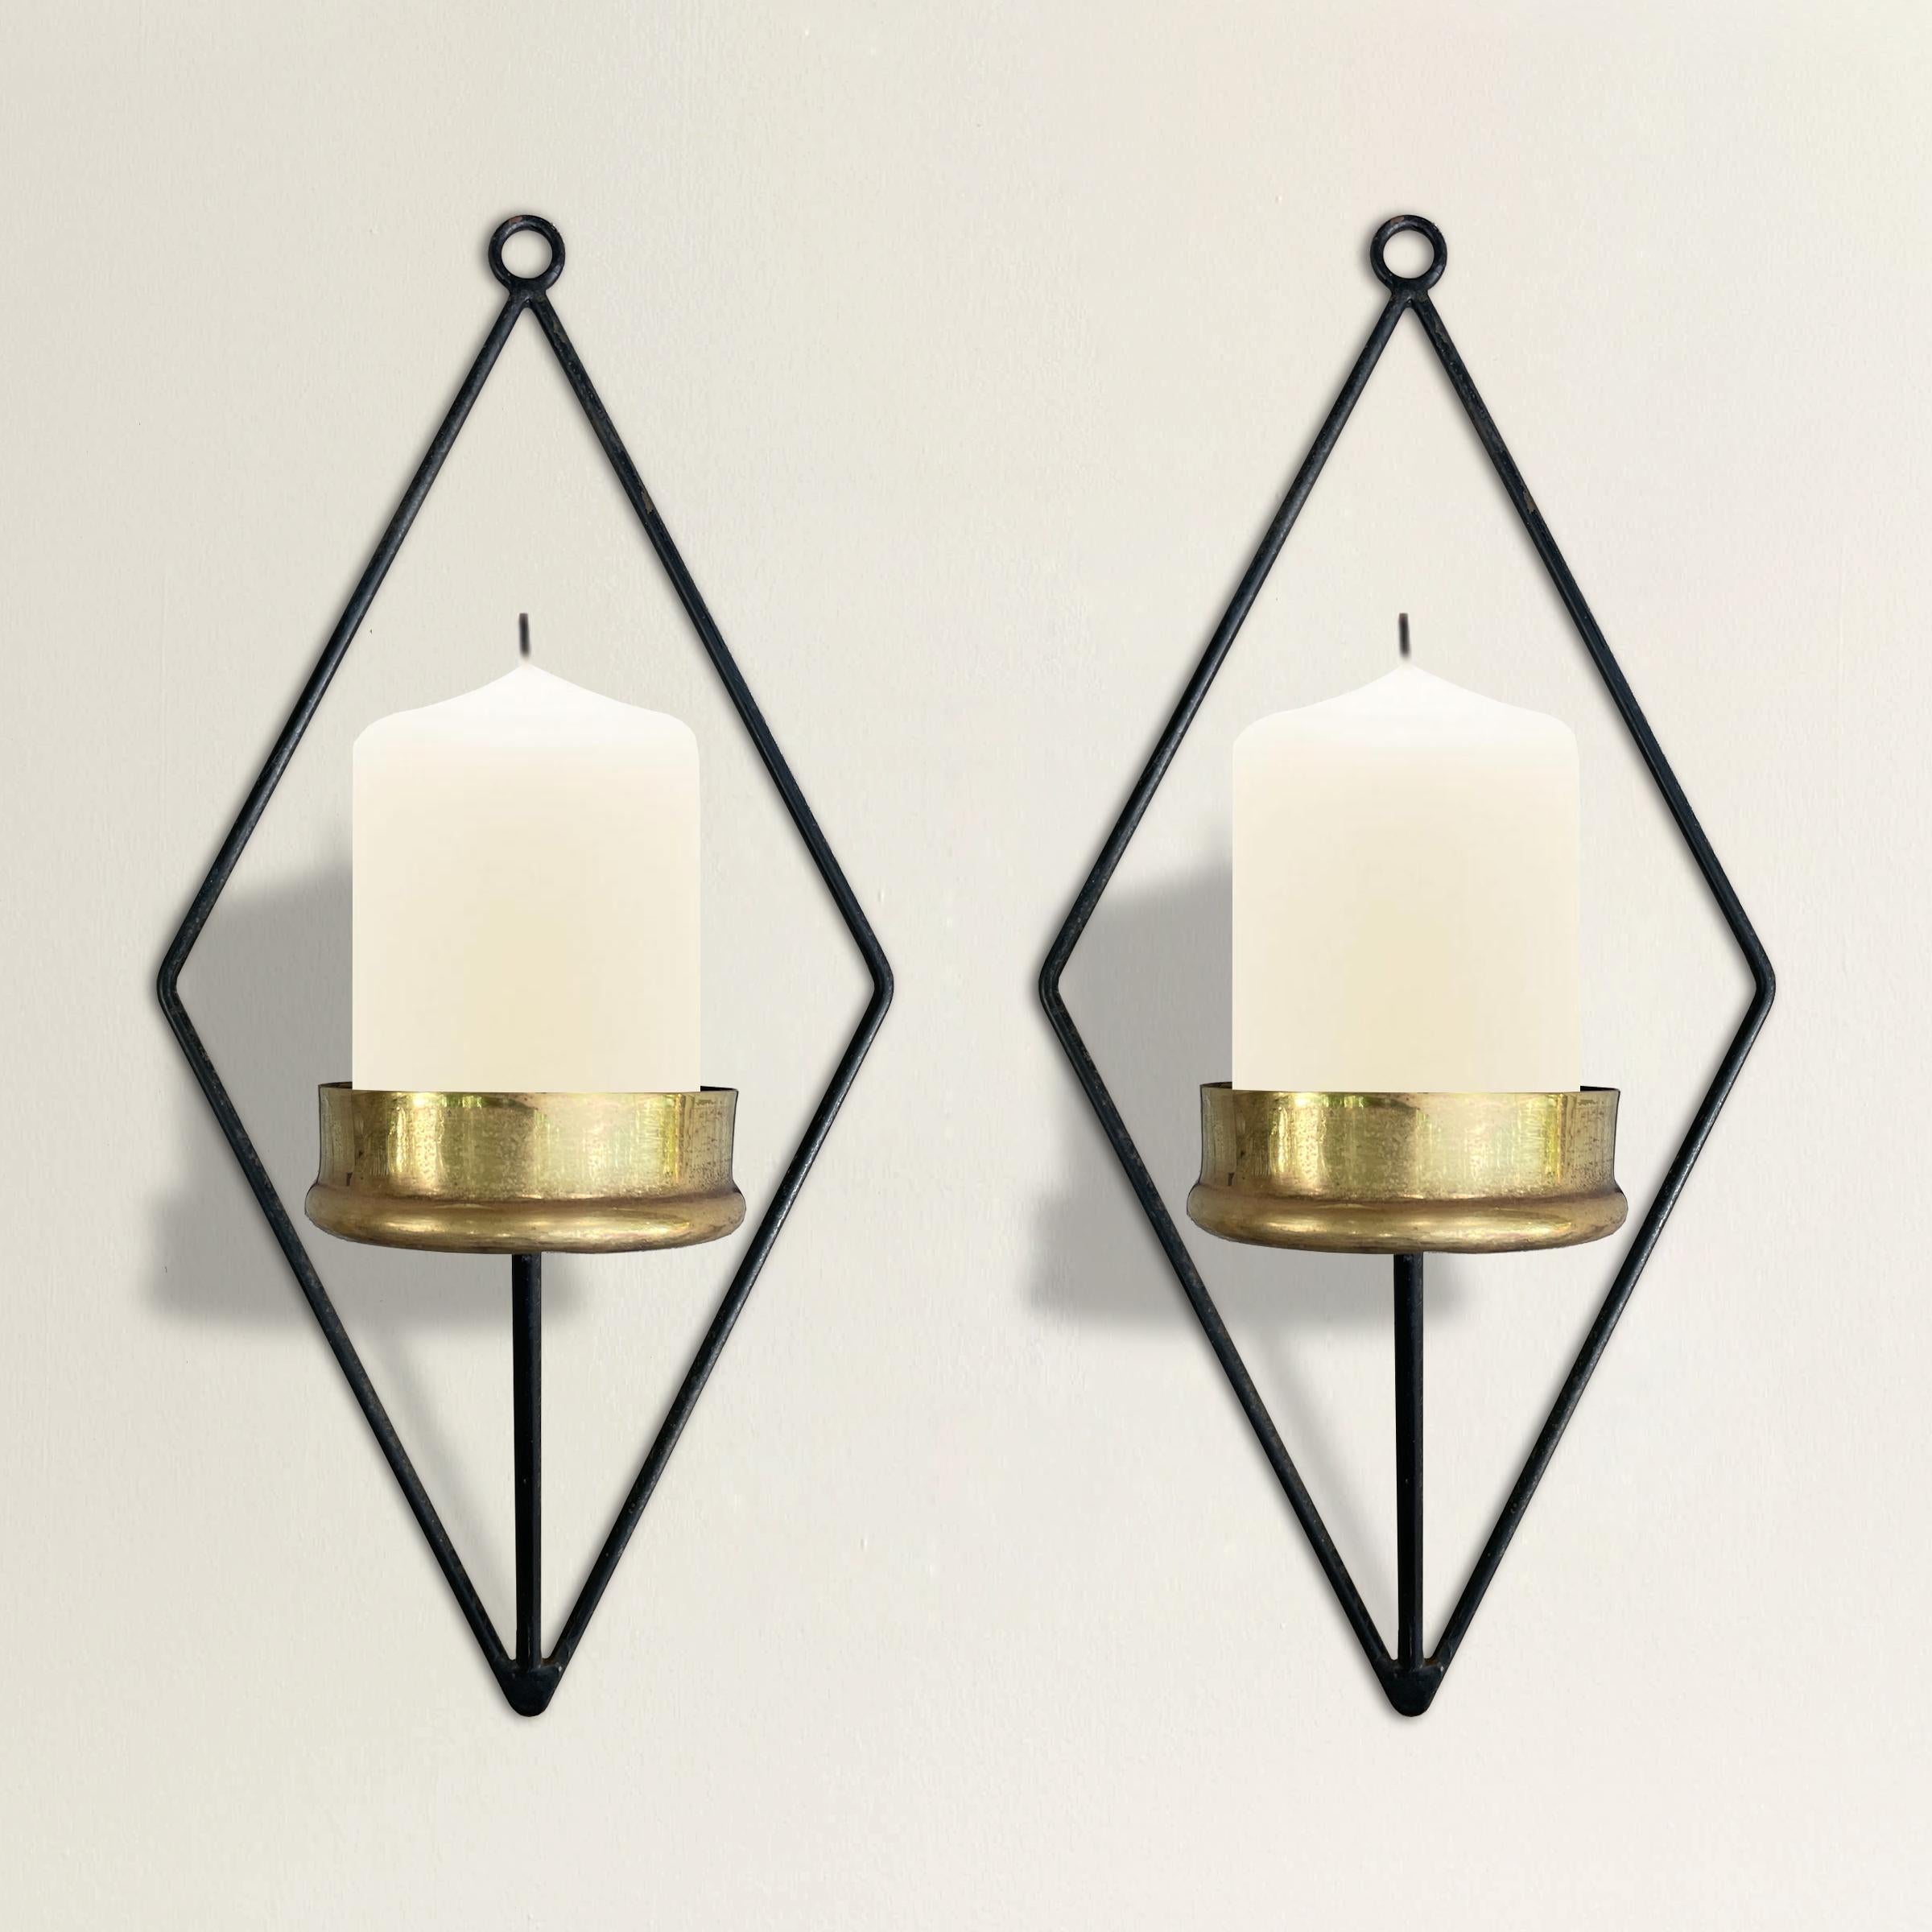 A pair of chic mid-20th century Italian candle sconces with simple steel diamond-form frames and single arms supporting brass candle cups. The sconces can accommodate pillar and taper candles.